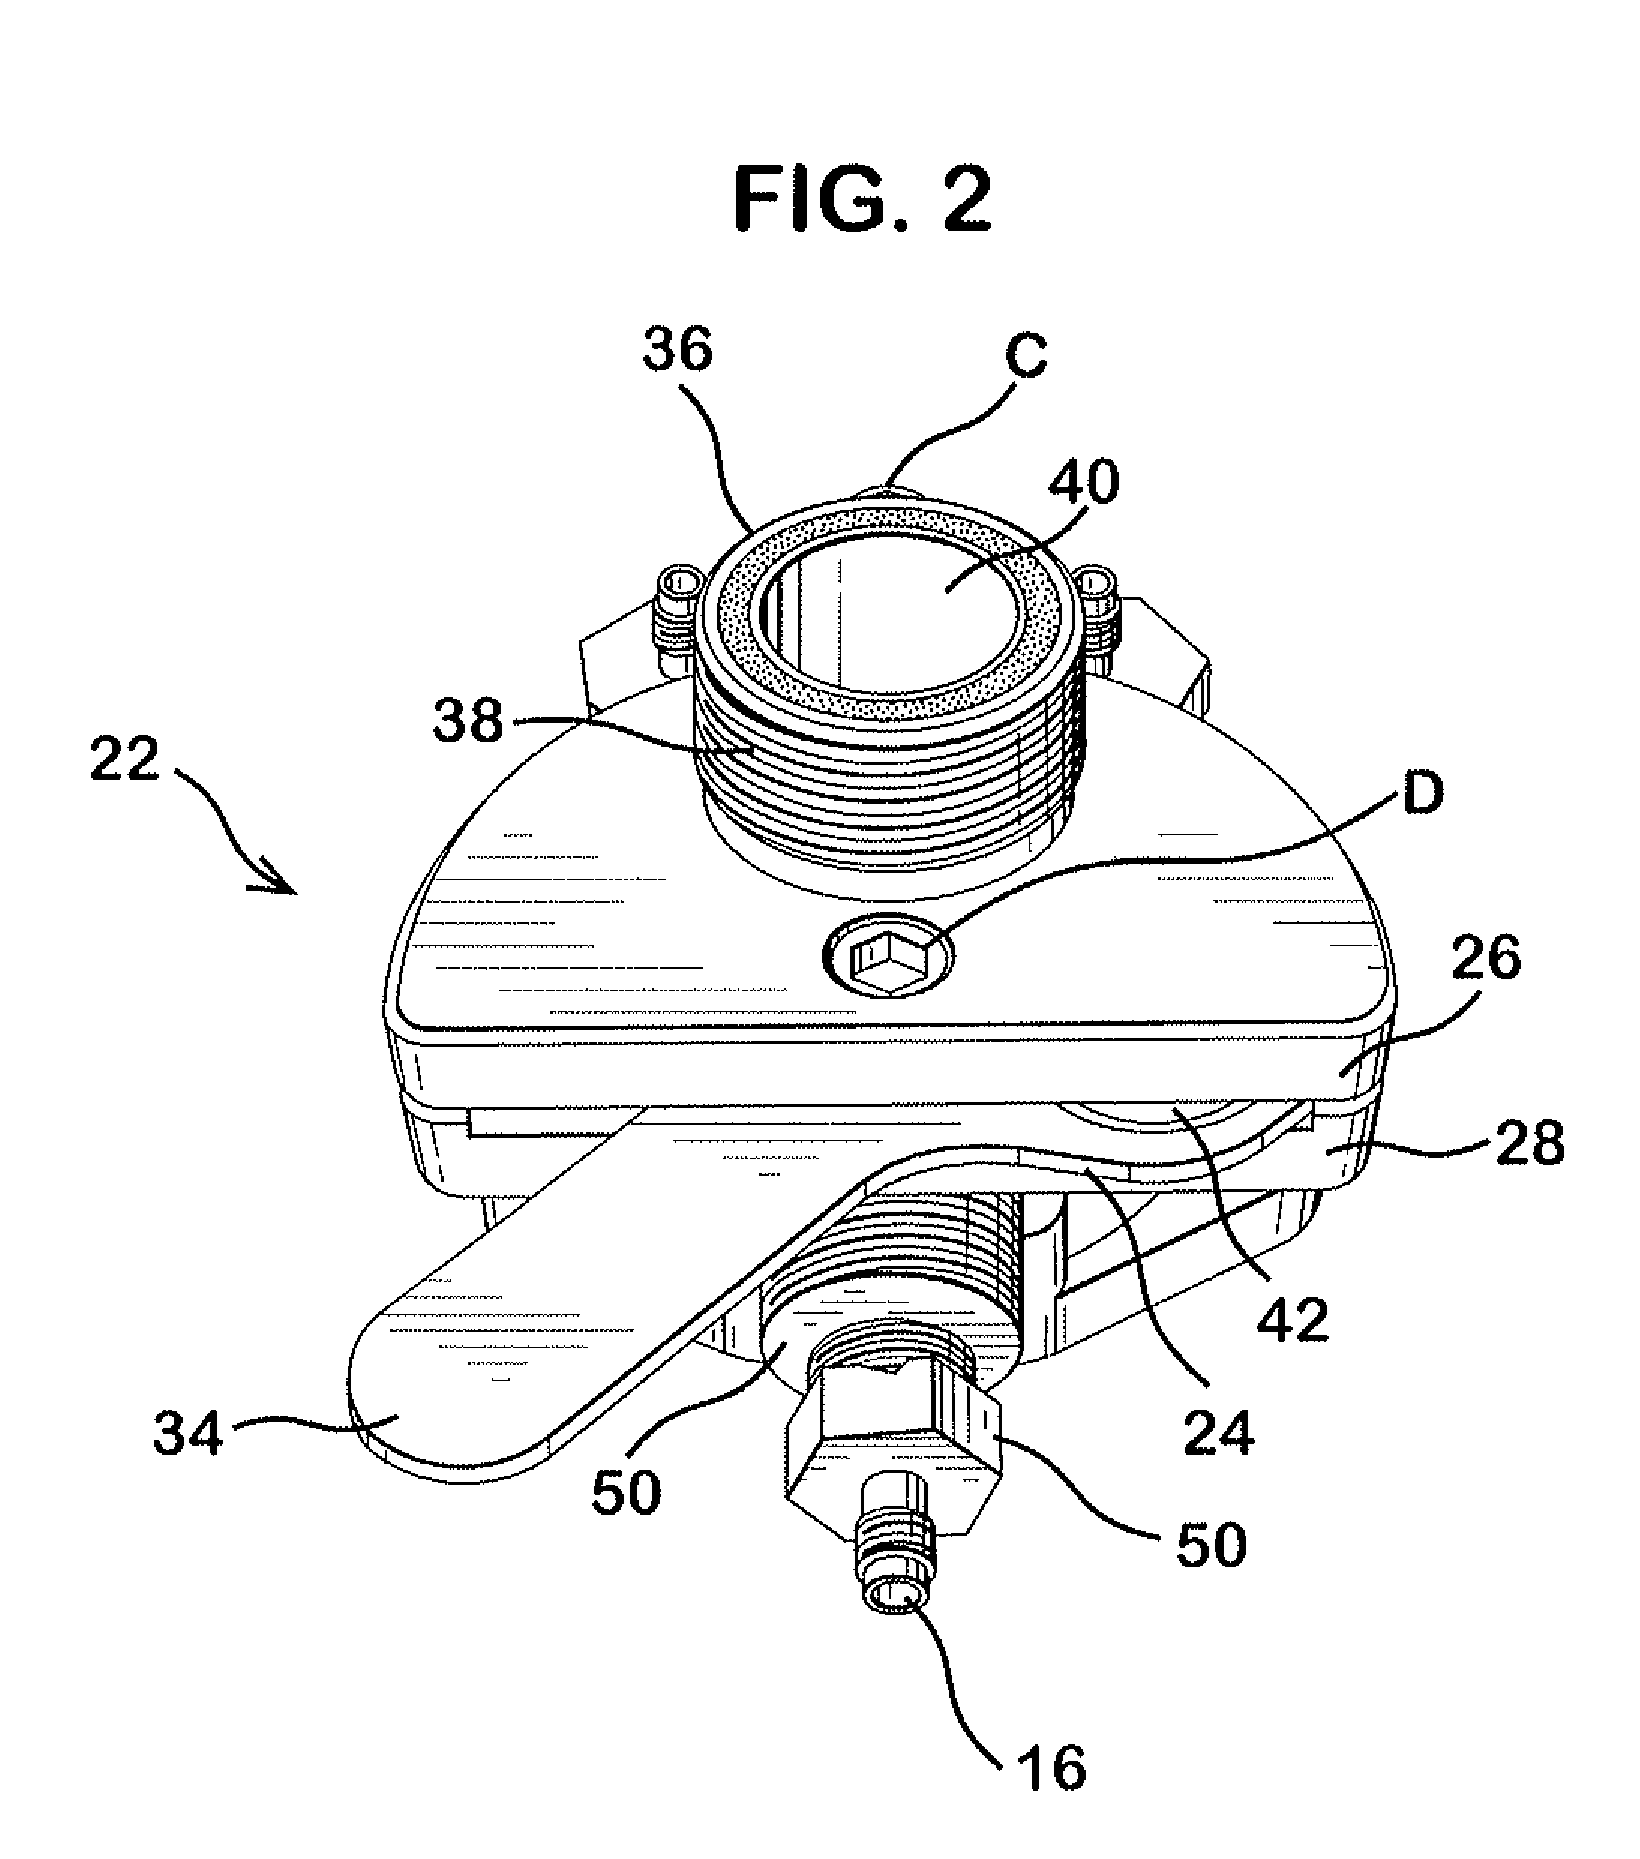 Delivery device for dispensing pharmaceutical dosage forms into dissolution testing apparatus